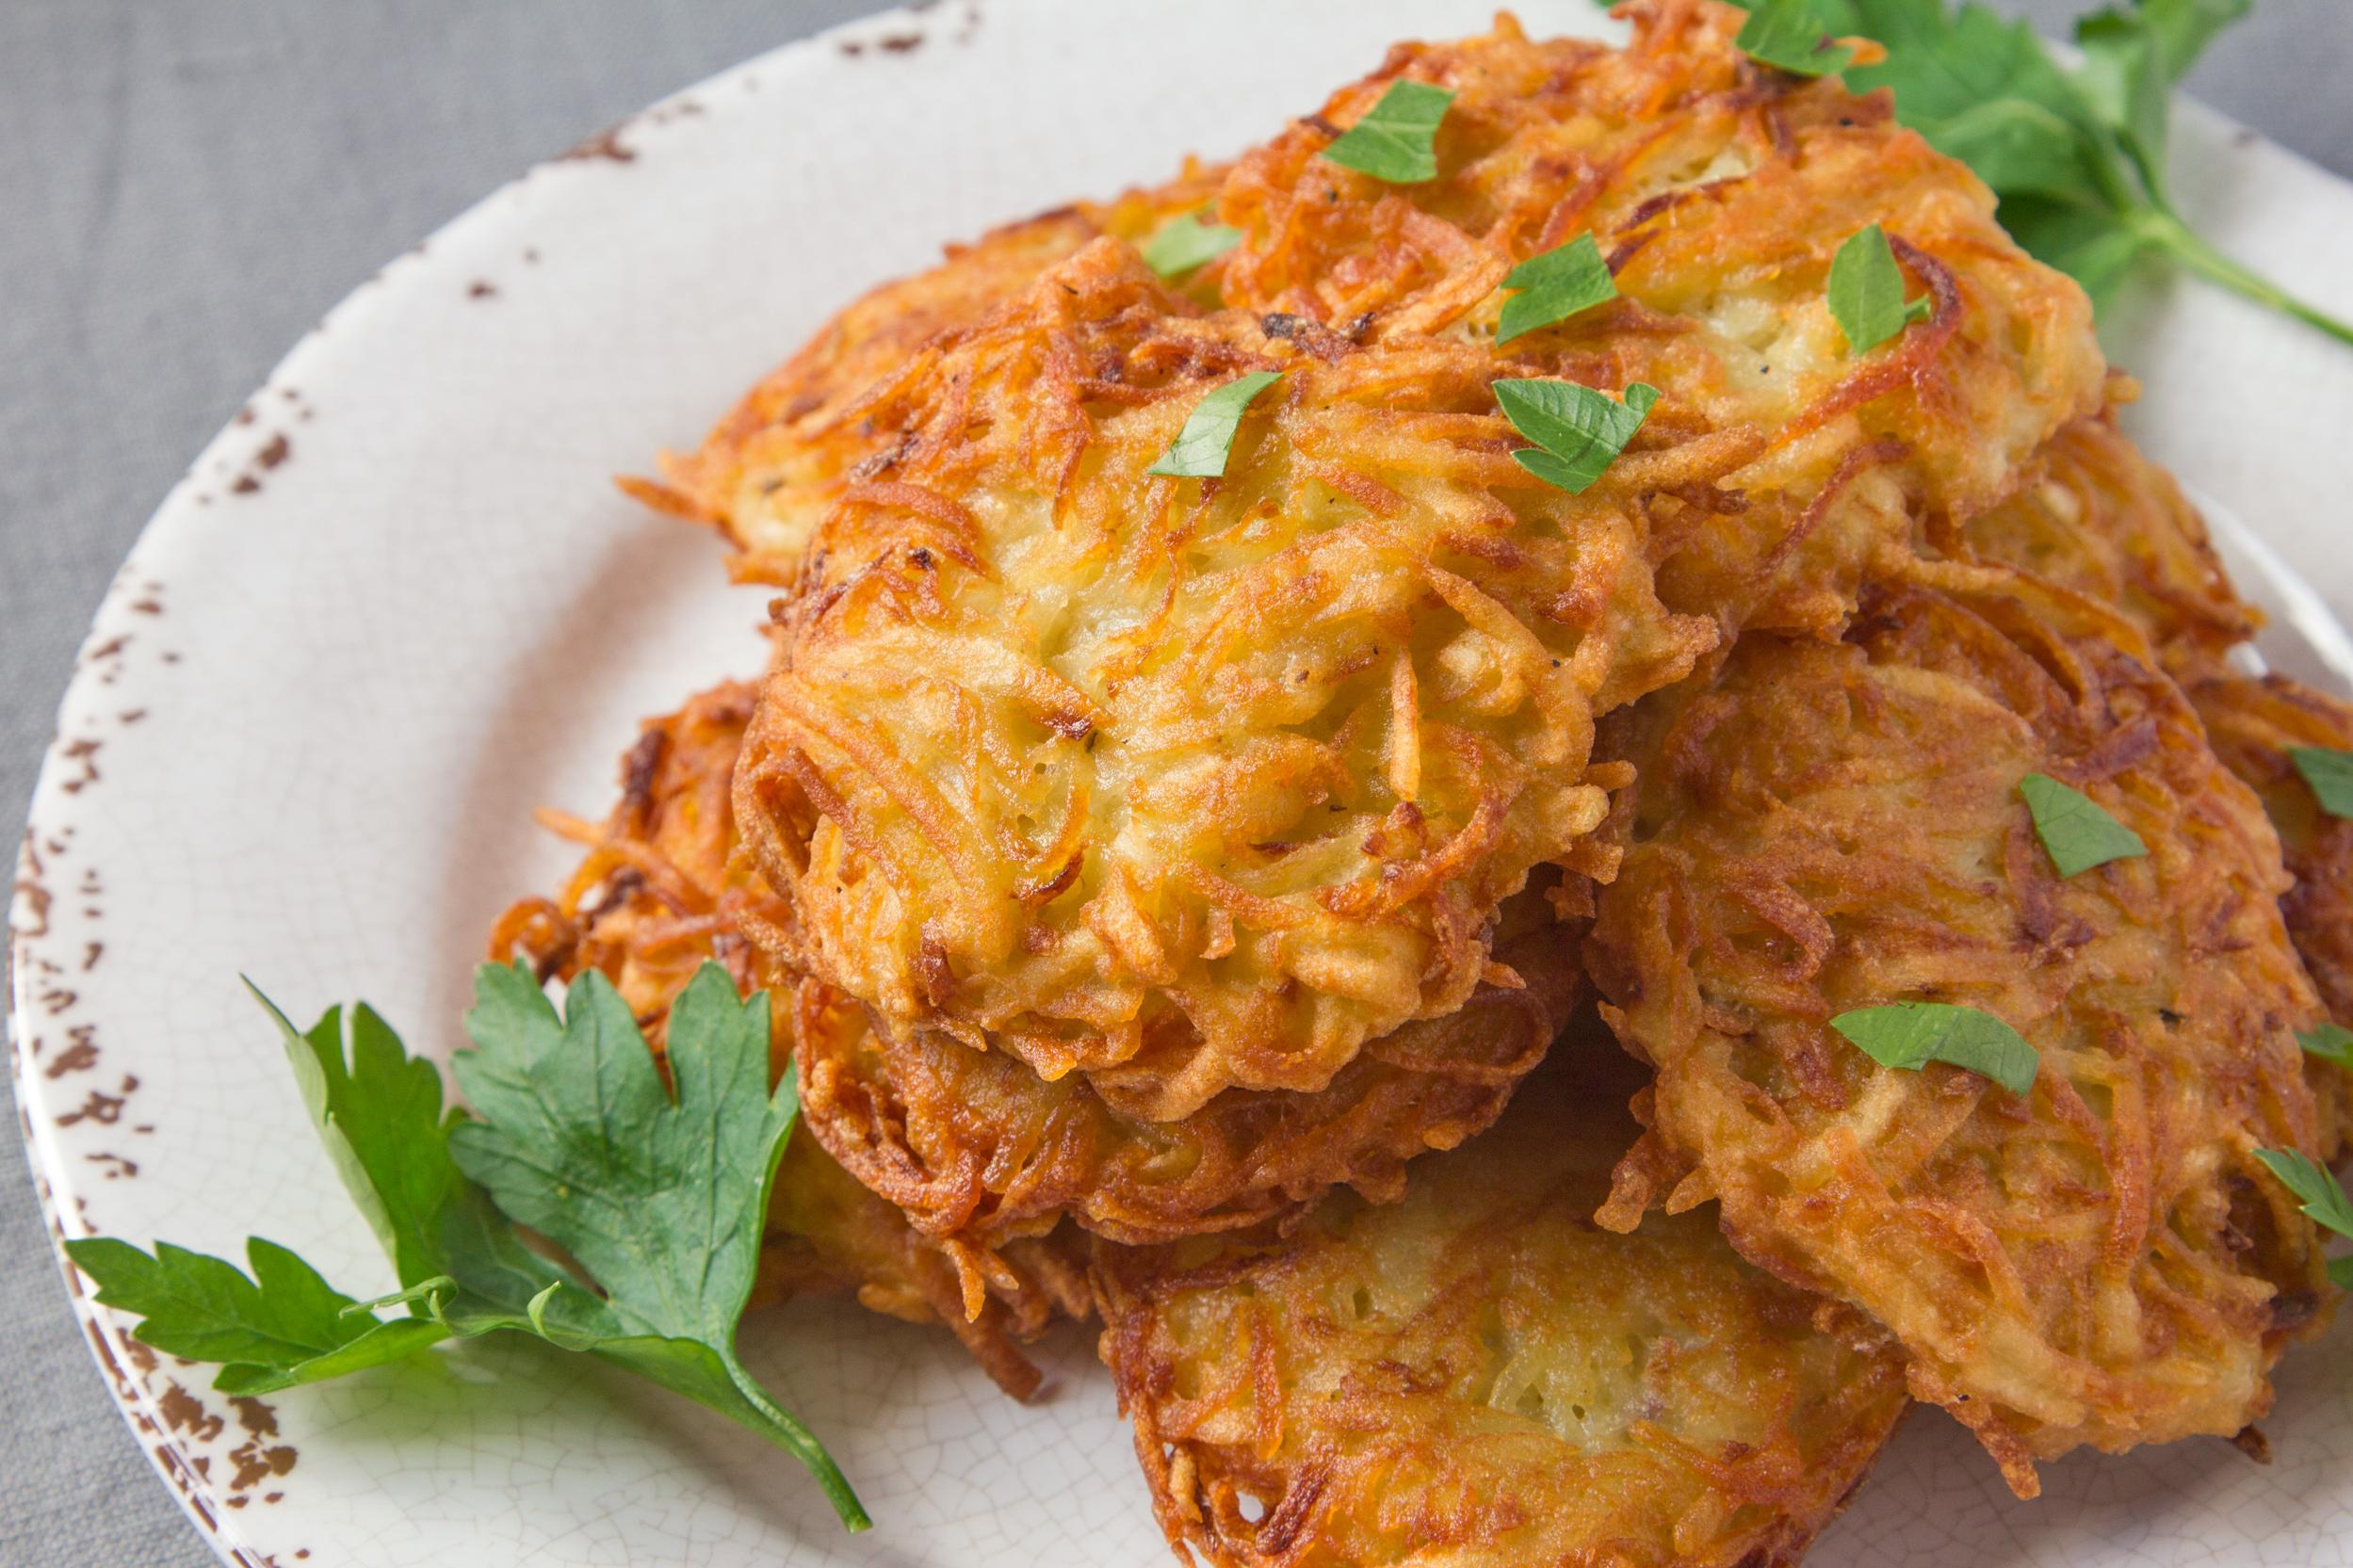  Crispy on the outside, fluffy on the inside – these latkes are worth fighting for!